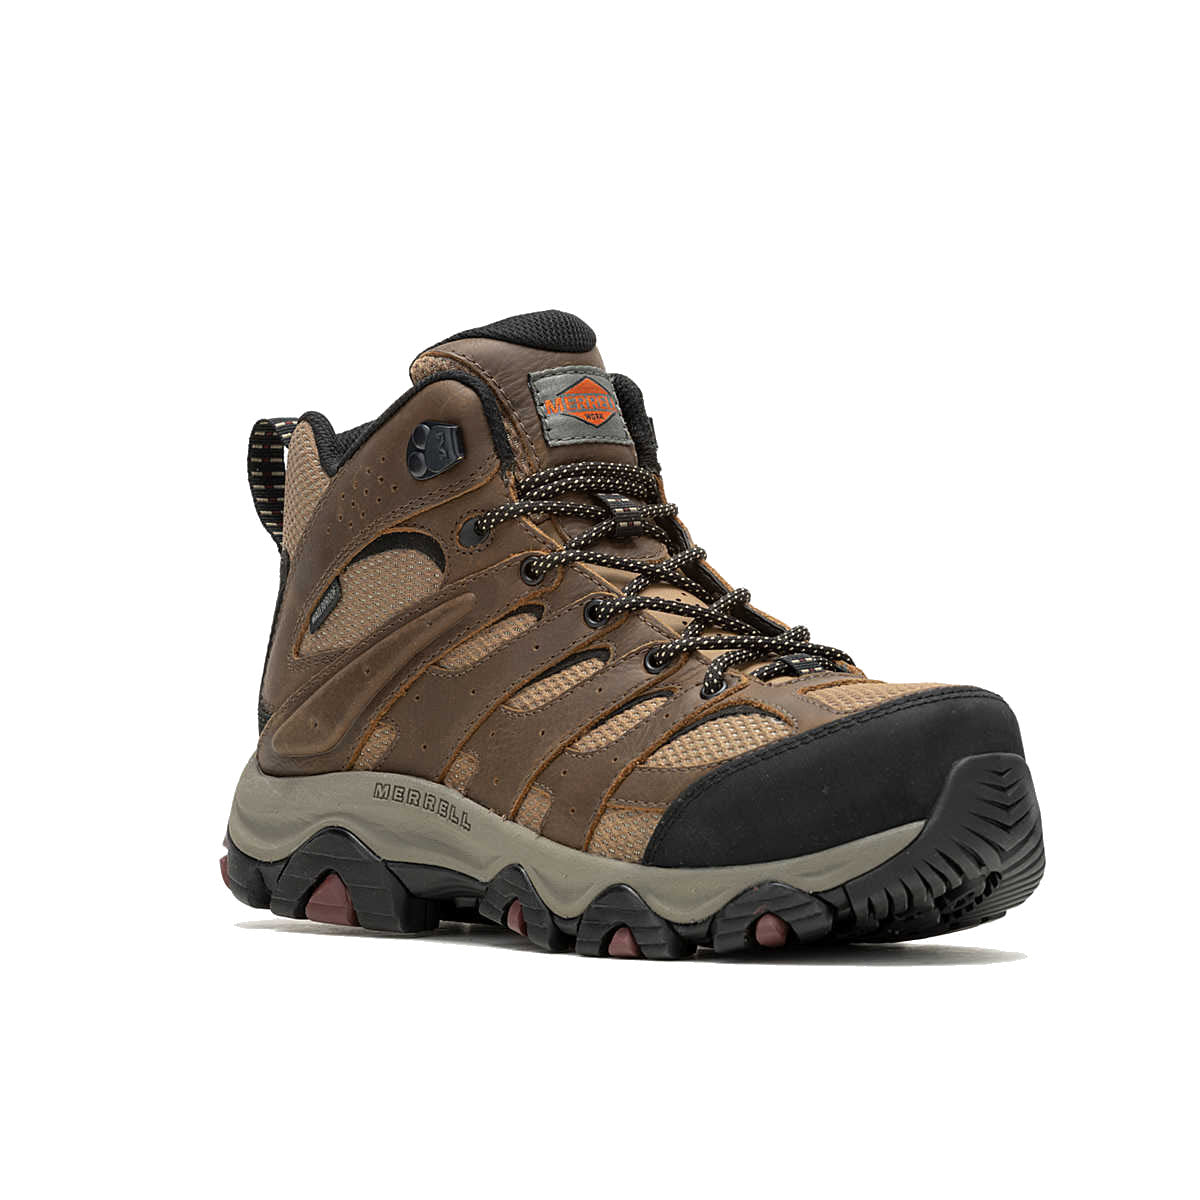 A single Merrell hiking boot with black and gray accents, featuring a robust tread, lace-up front, and an EH-rated protection.